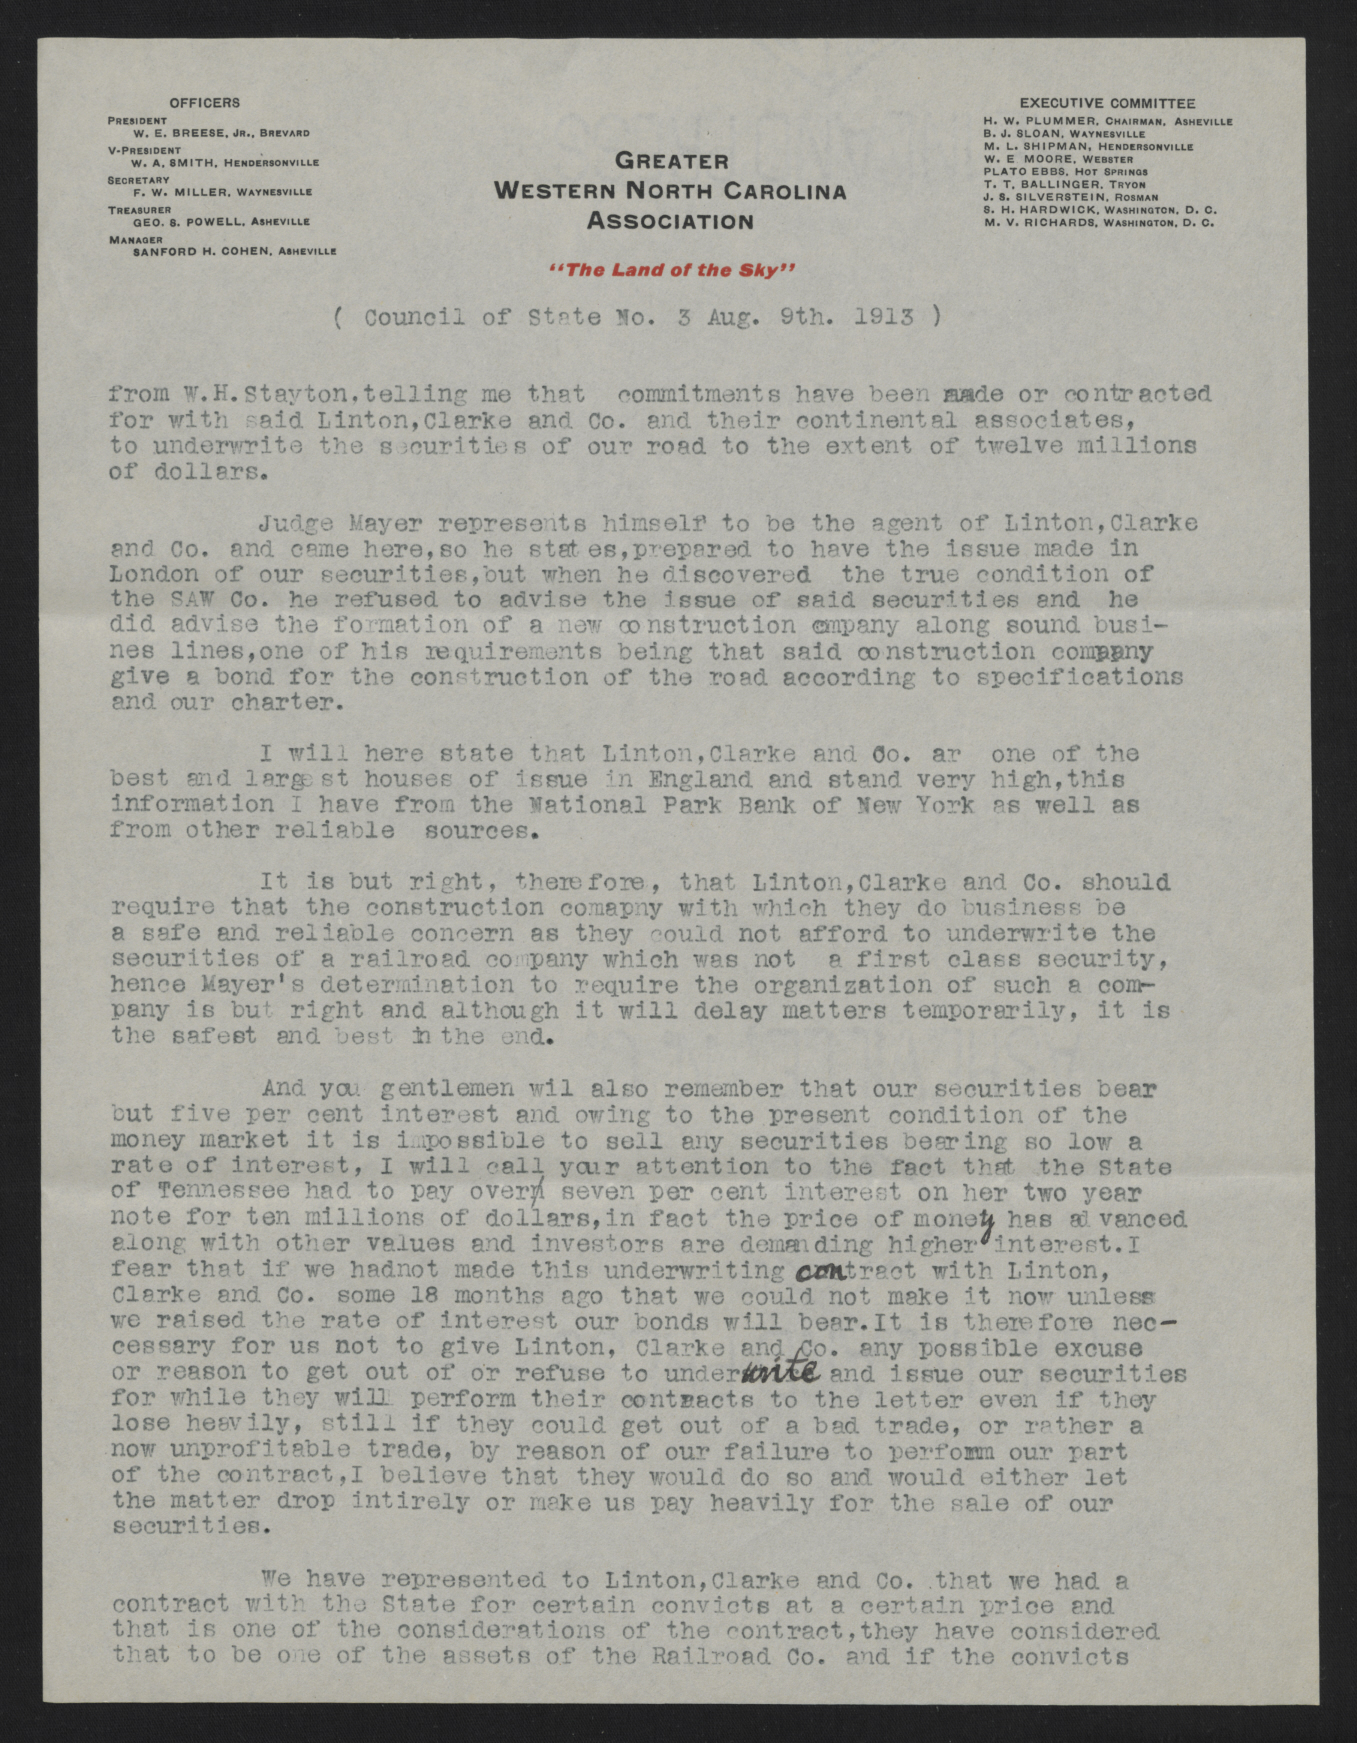 Letter from Breese to the Council of State, August 9, 1913, page 3